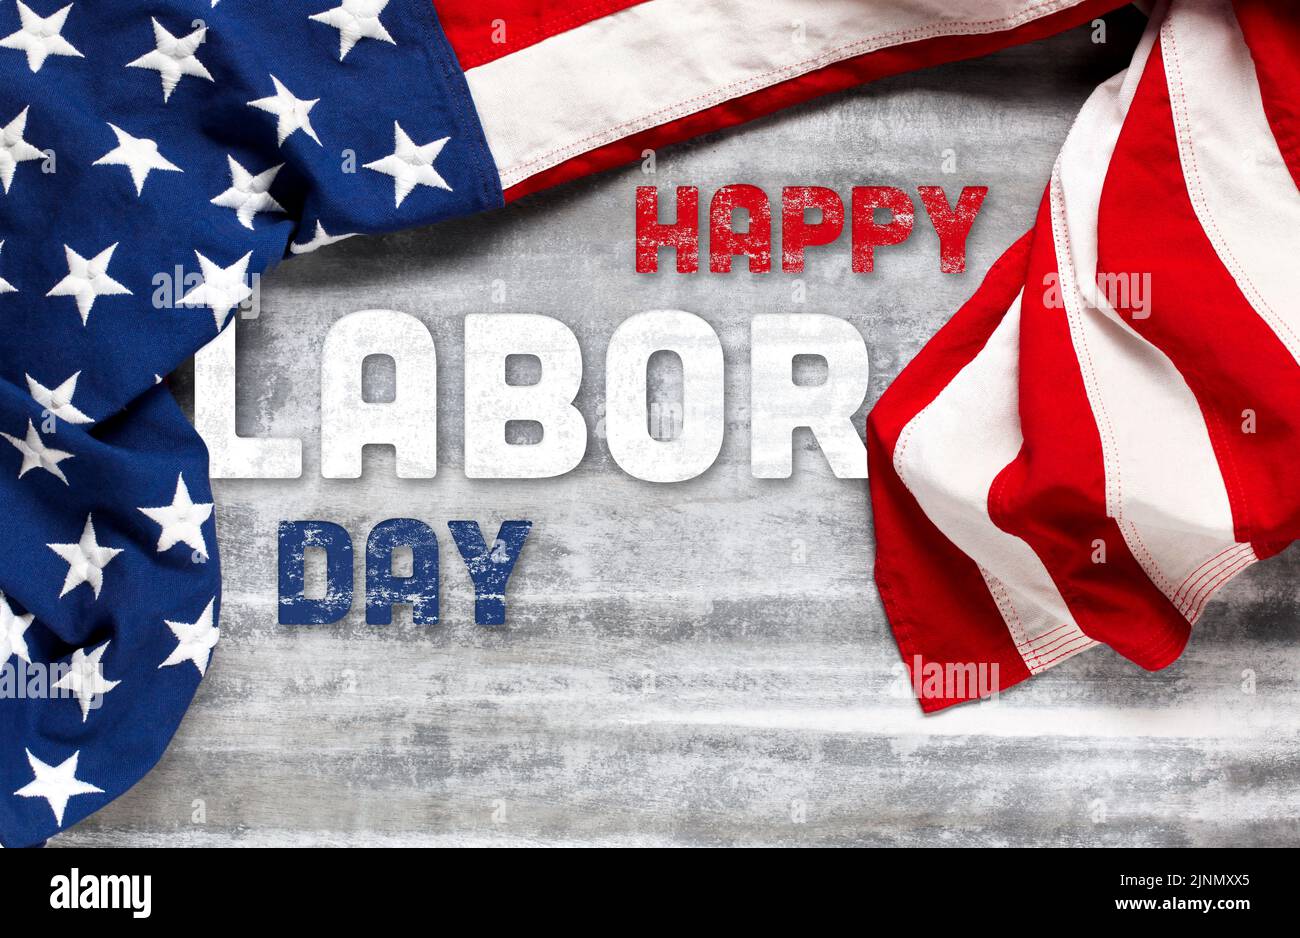 US American flag on worn white wooden background. For USA Labor day celebration. With Happy Labor Day text. Stock Photo